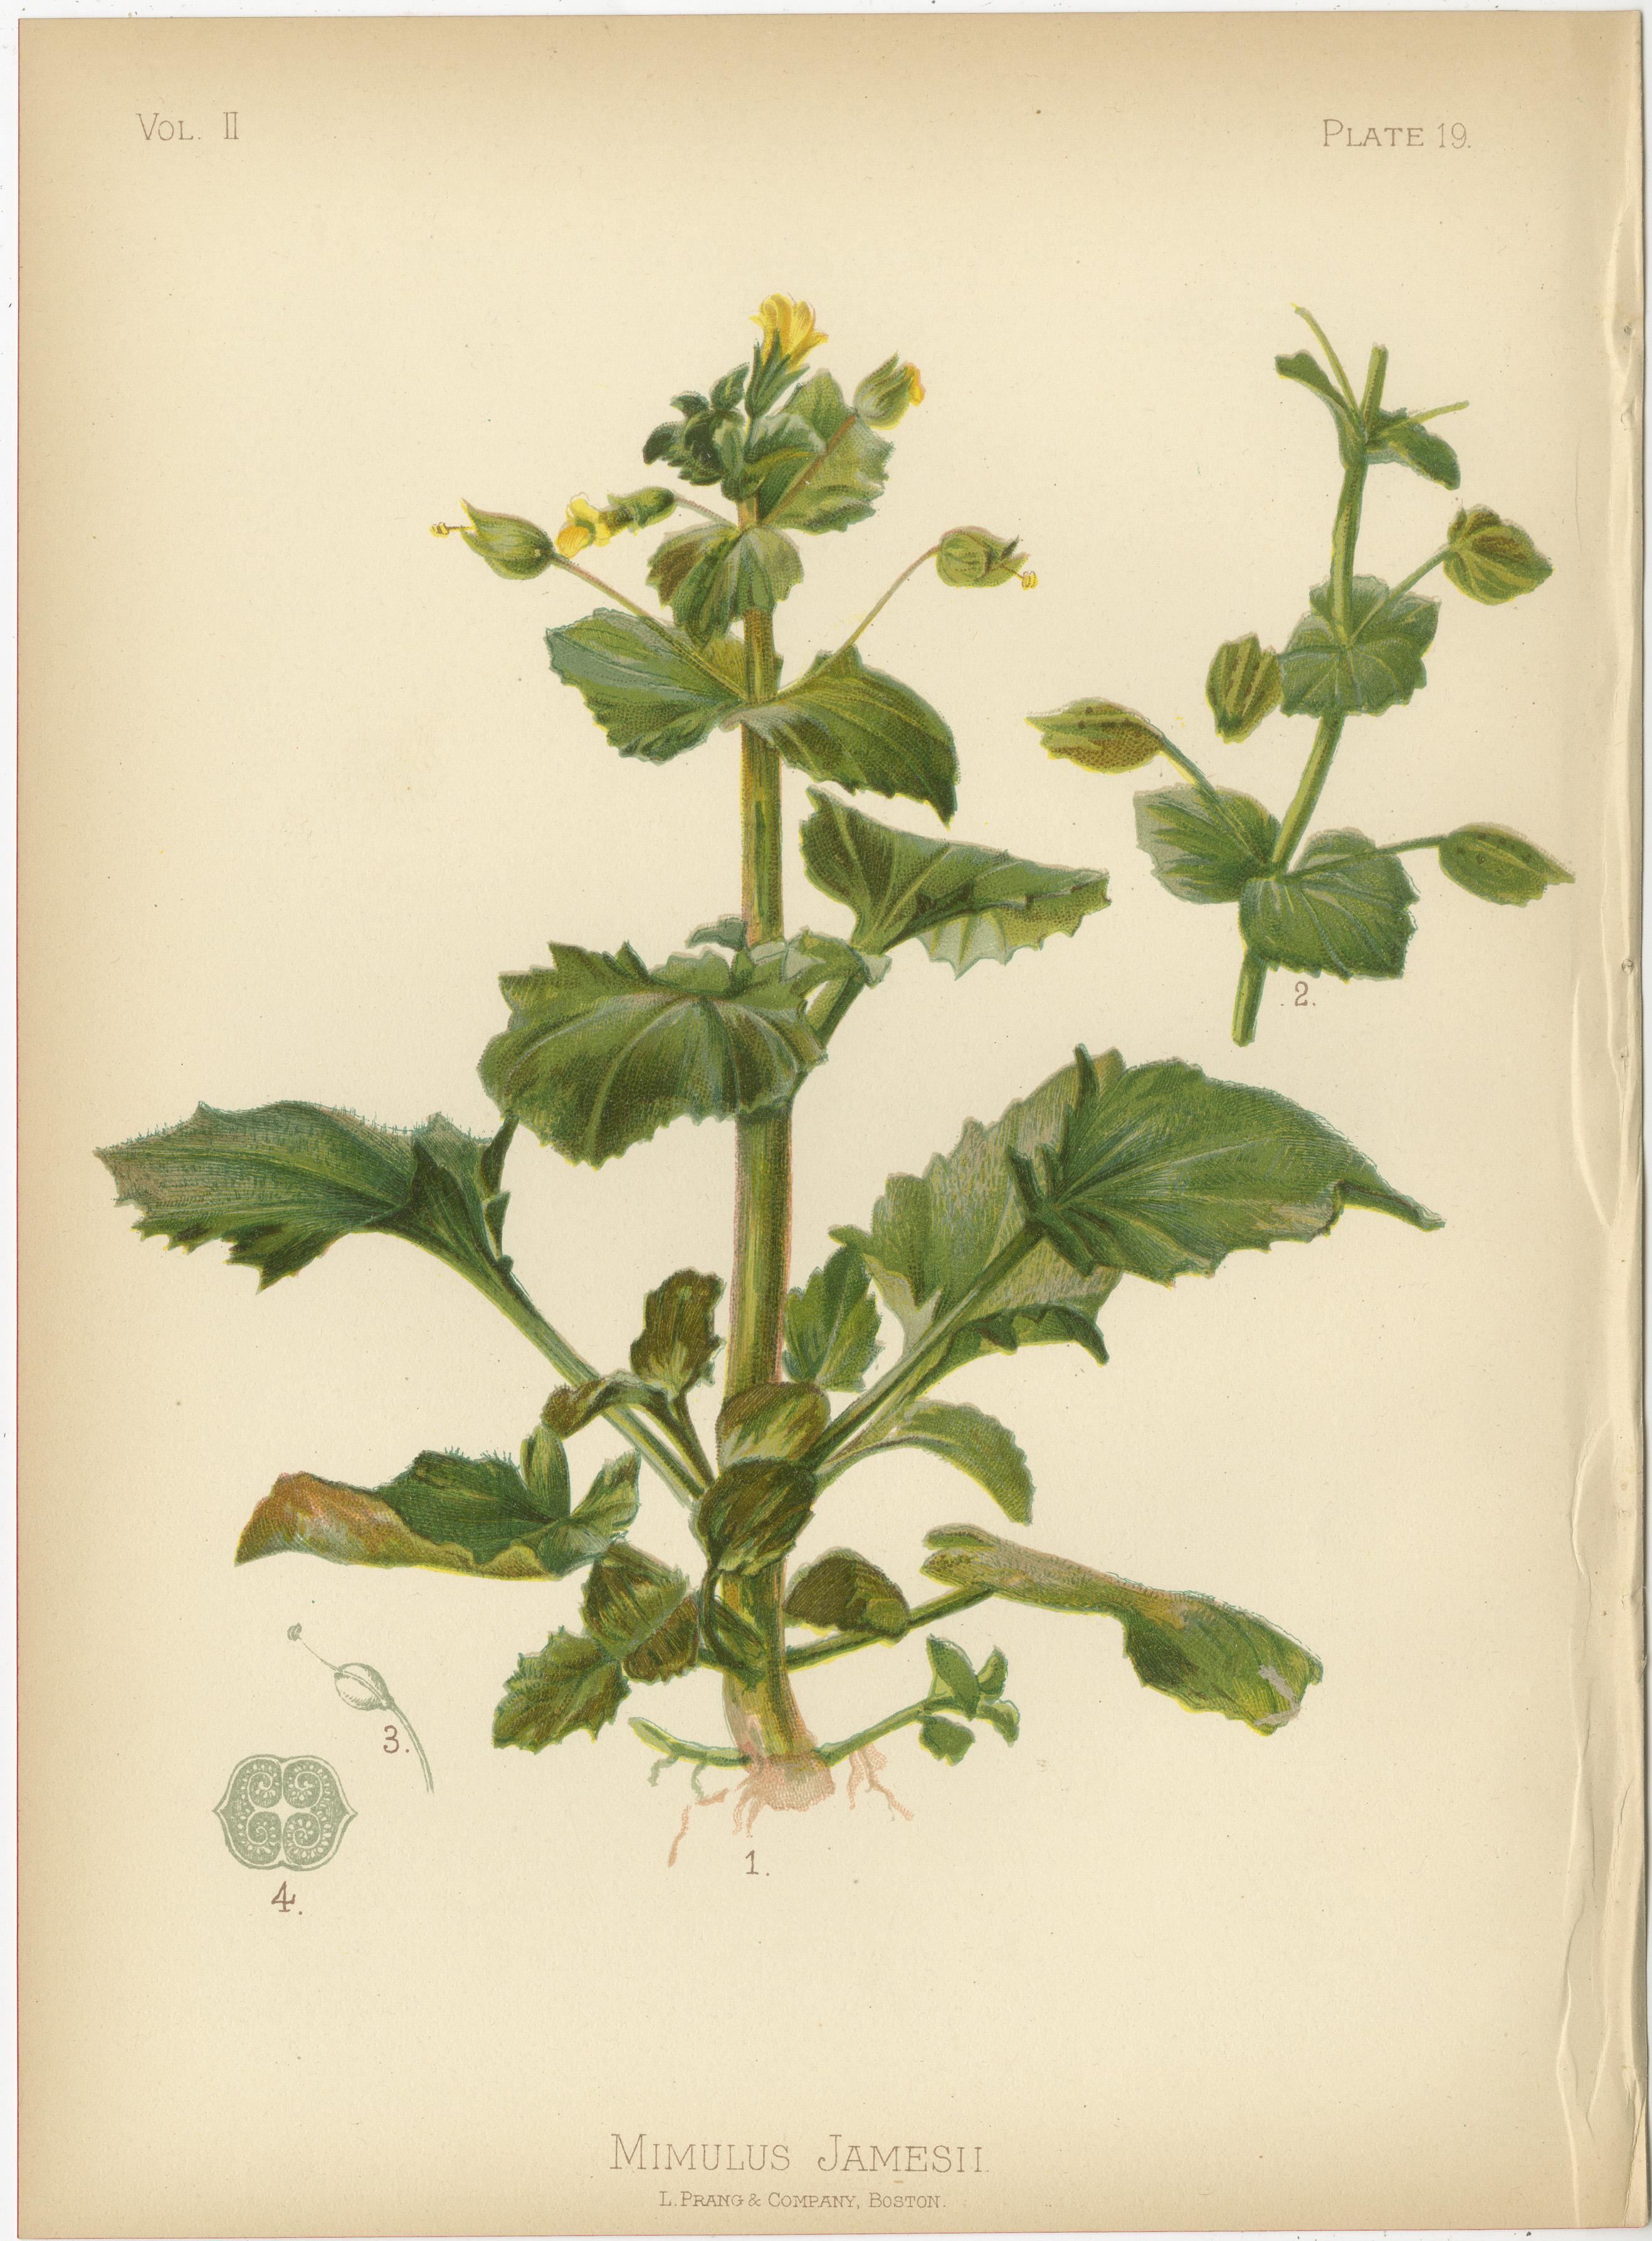 Late 19th Century Verdant Vintage: A Collection of 1879 Botanical Illustrations